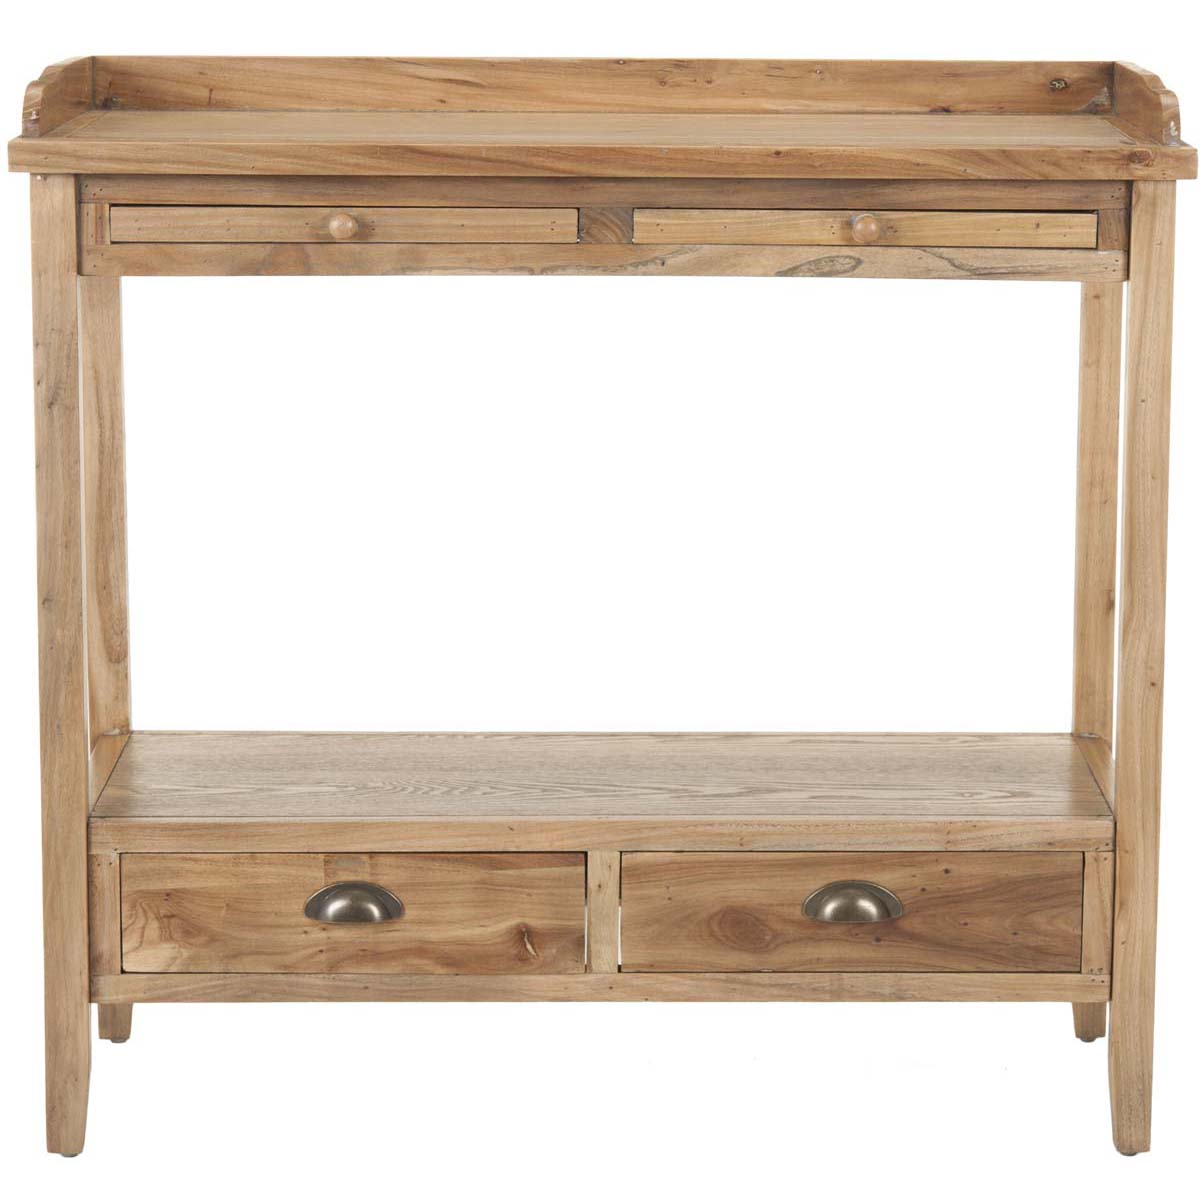 Safavieh Peter Console With Storage Drawers , AMH6571 - Weathered Oak